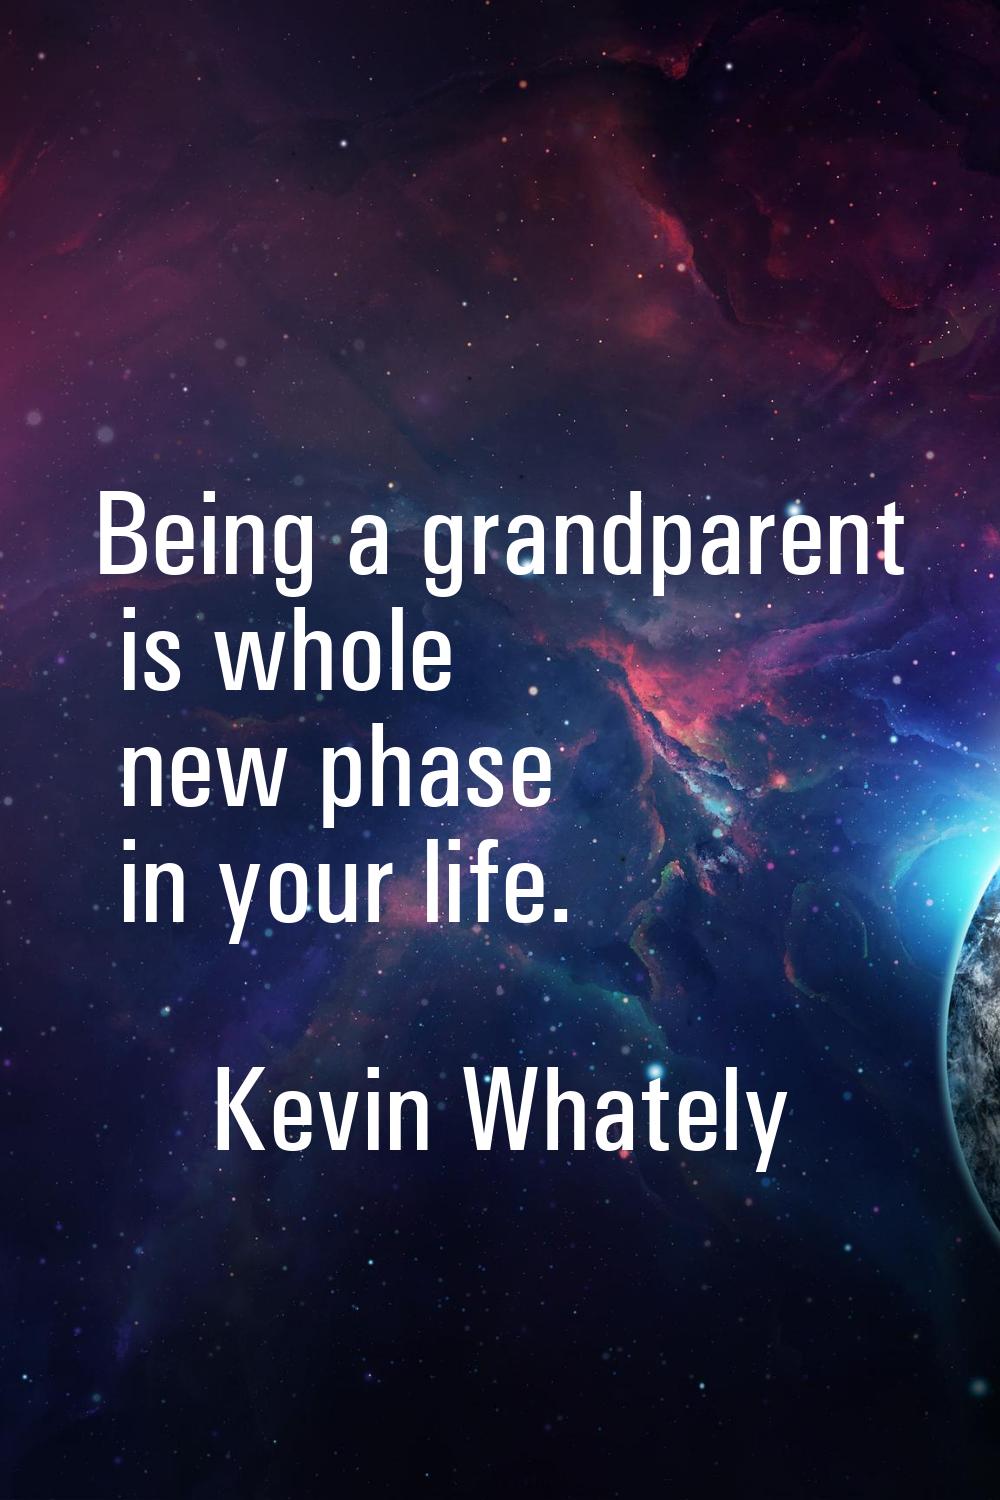 Being a grandparent is whole new phase in your life.